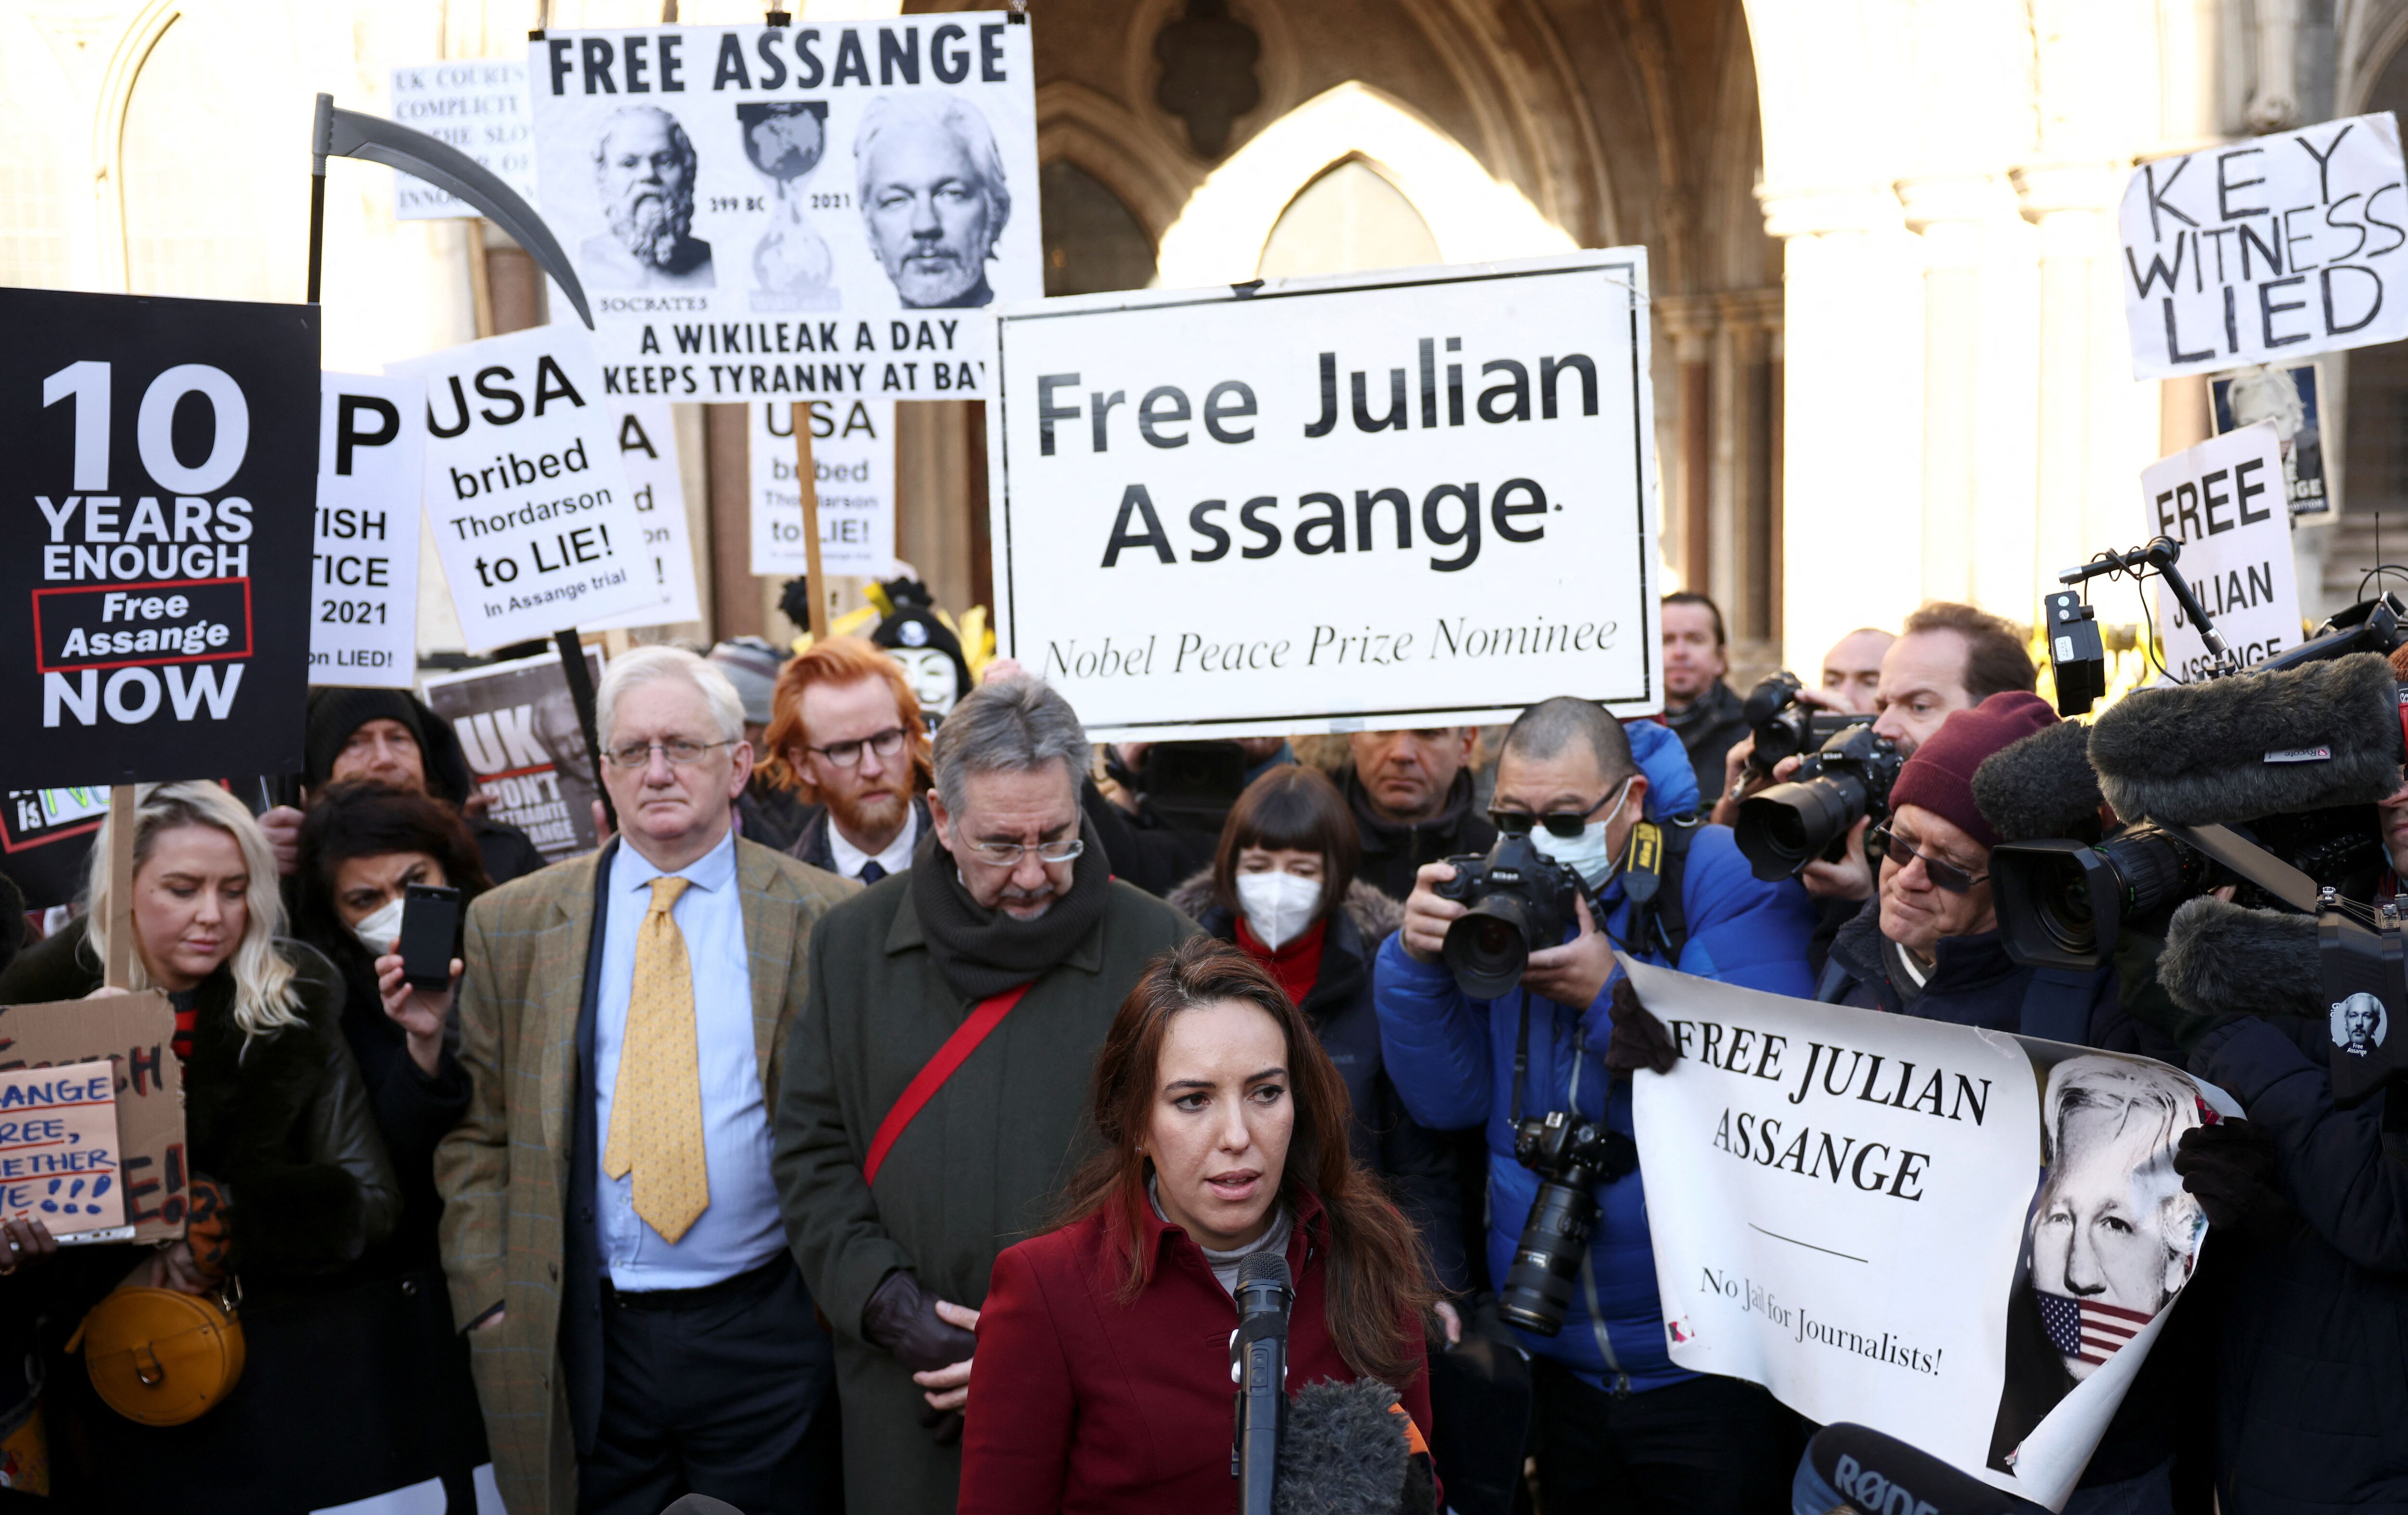 Stella Morris, partner of Wikileaks founder Julian Assange, speaks to media outside the Royal Courts of Justice following the appeal against Assange's extradition in London, Britain December 10, 2021. REUTERS/Henry Nicholls